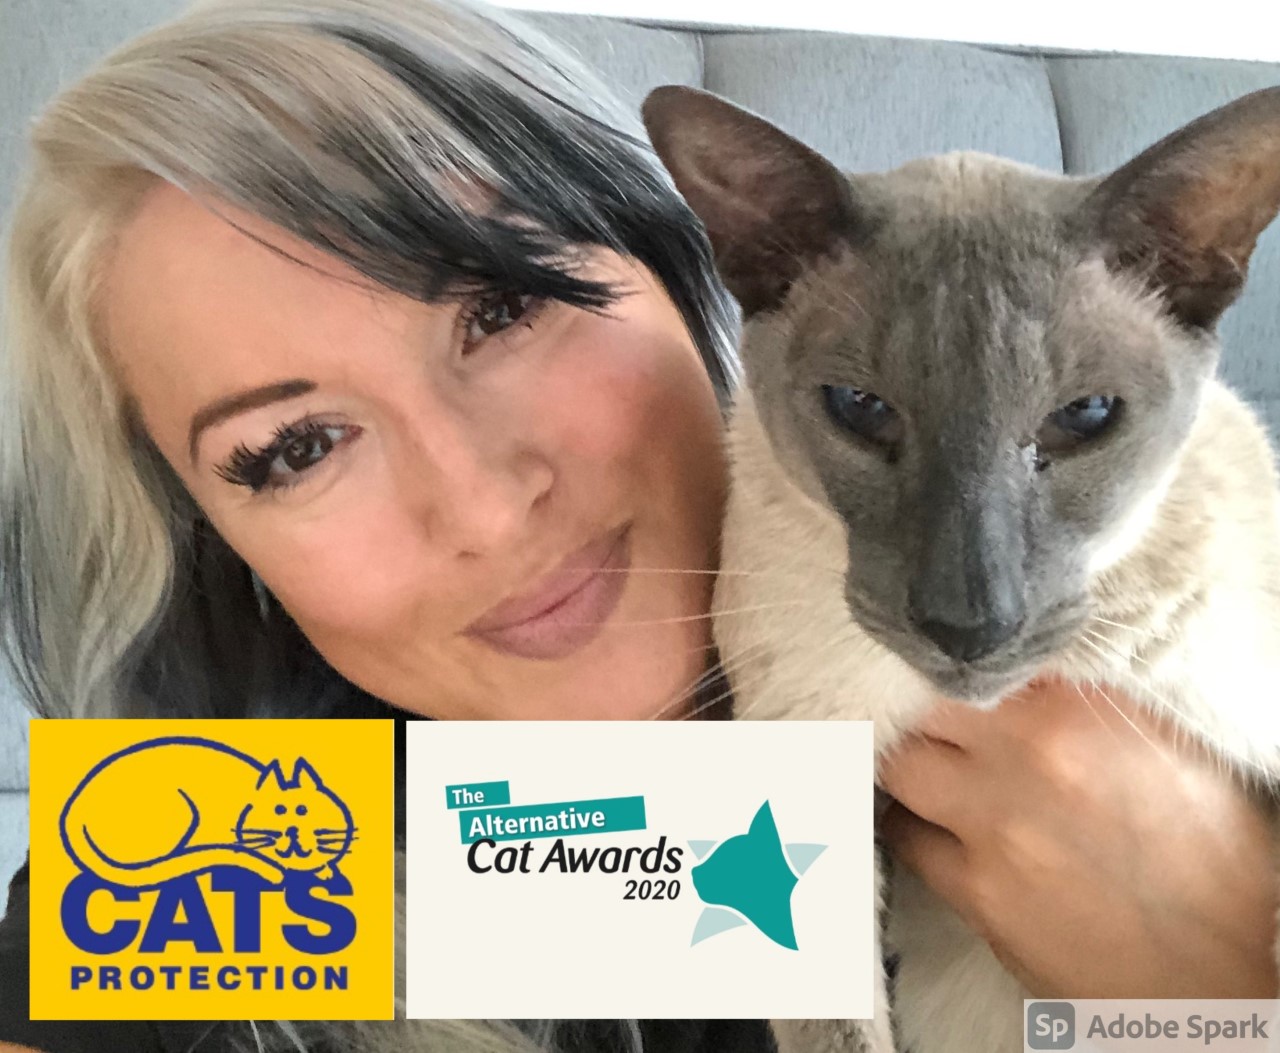 Beauty expert Gina Akers to judge new national cat video competition